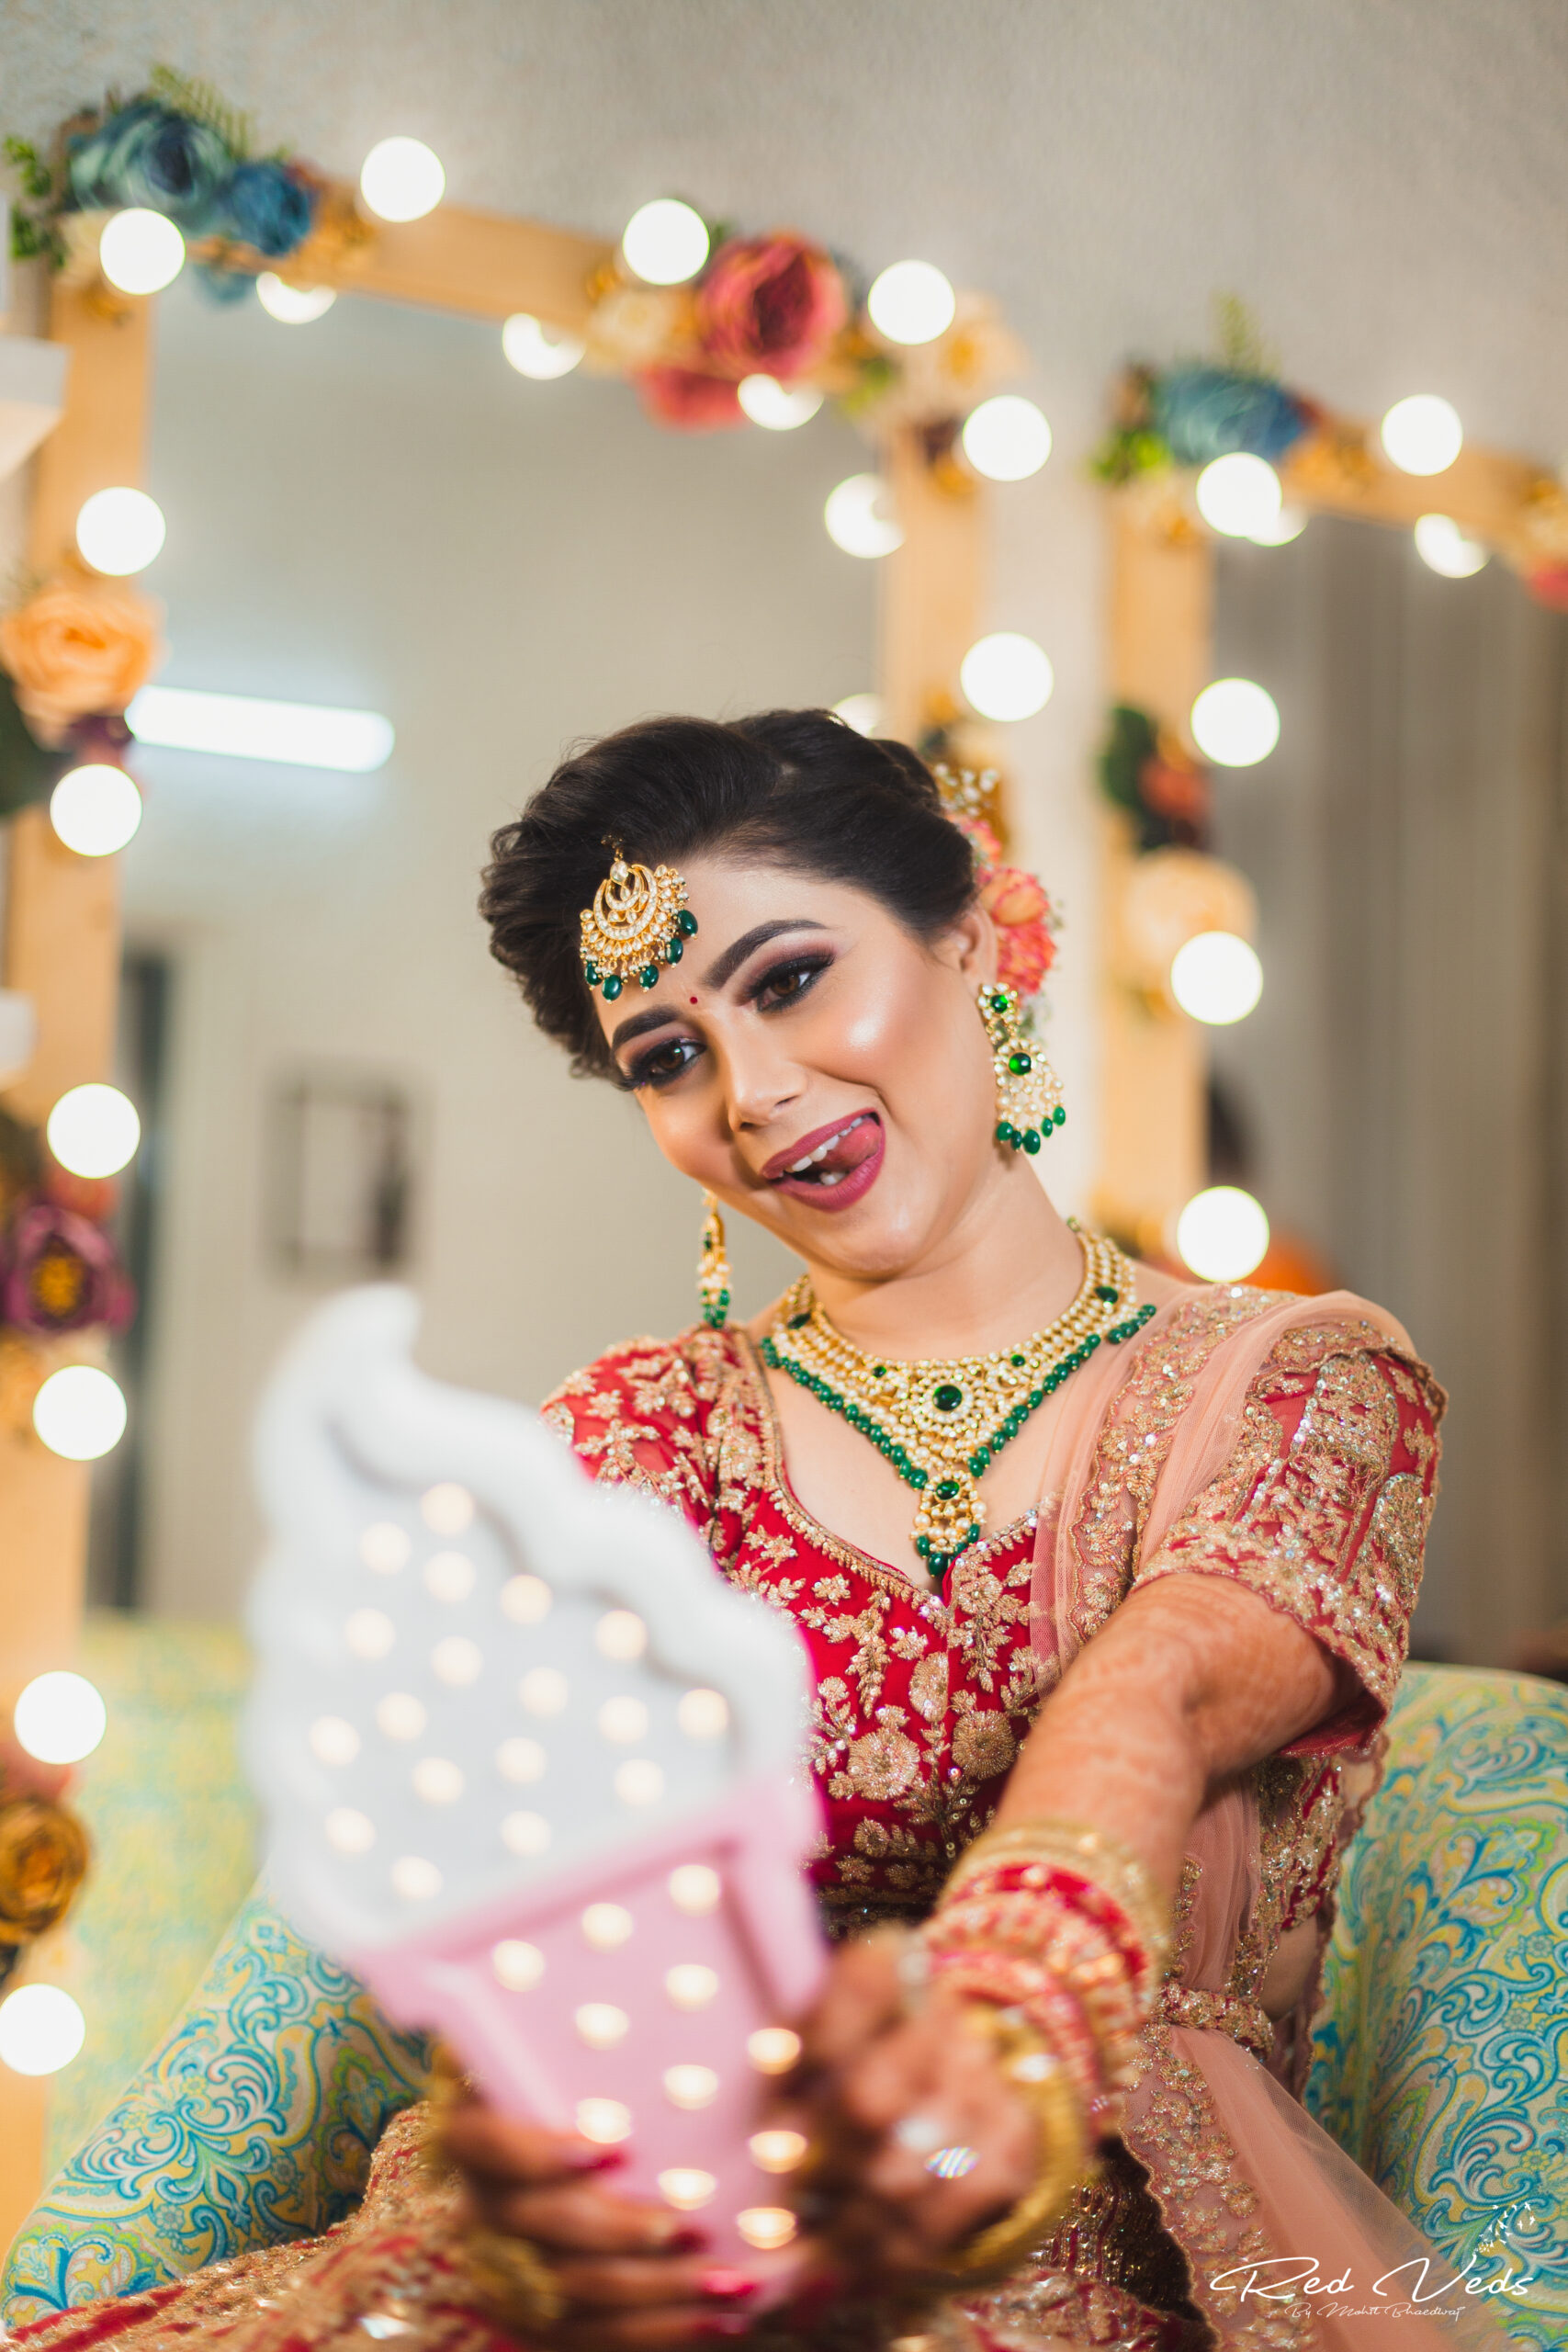 The Many Facets of Indian Wedding Photography Styles